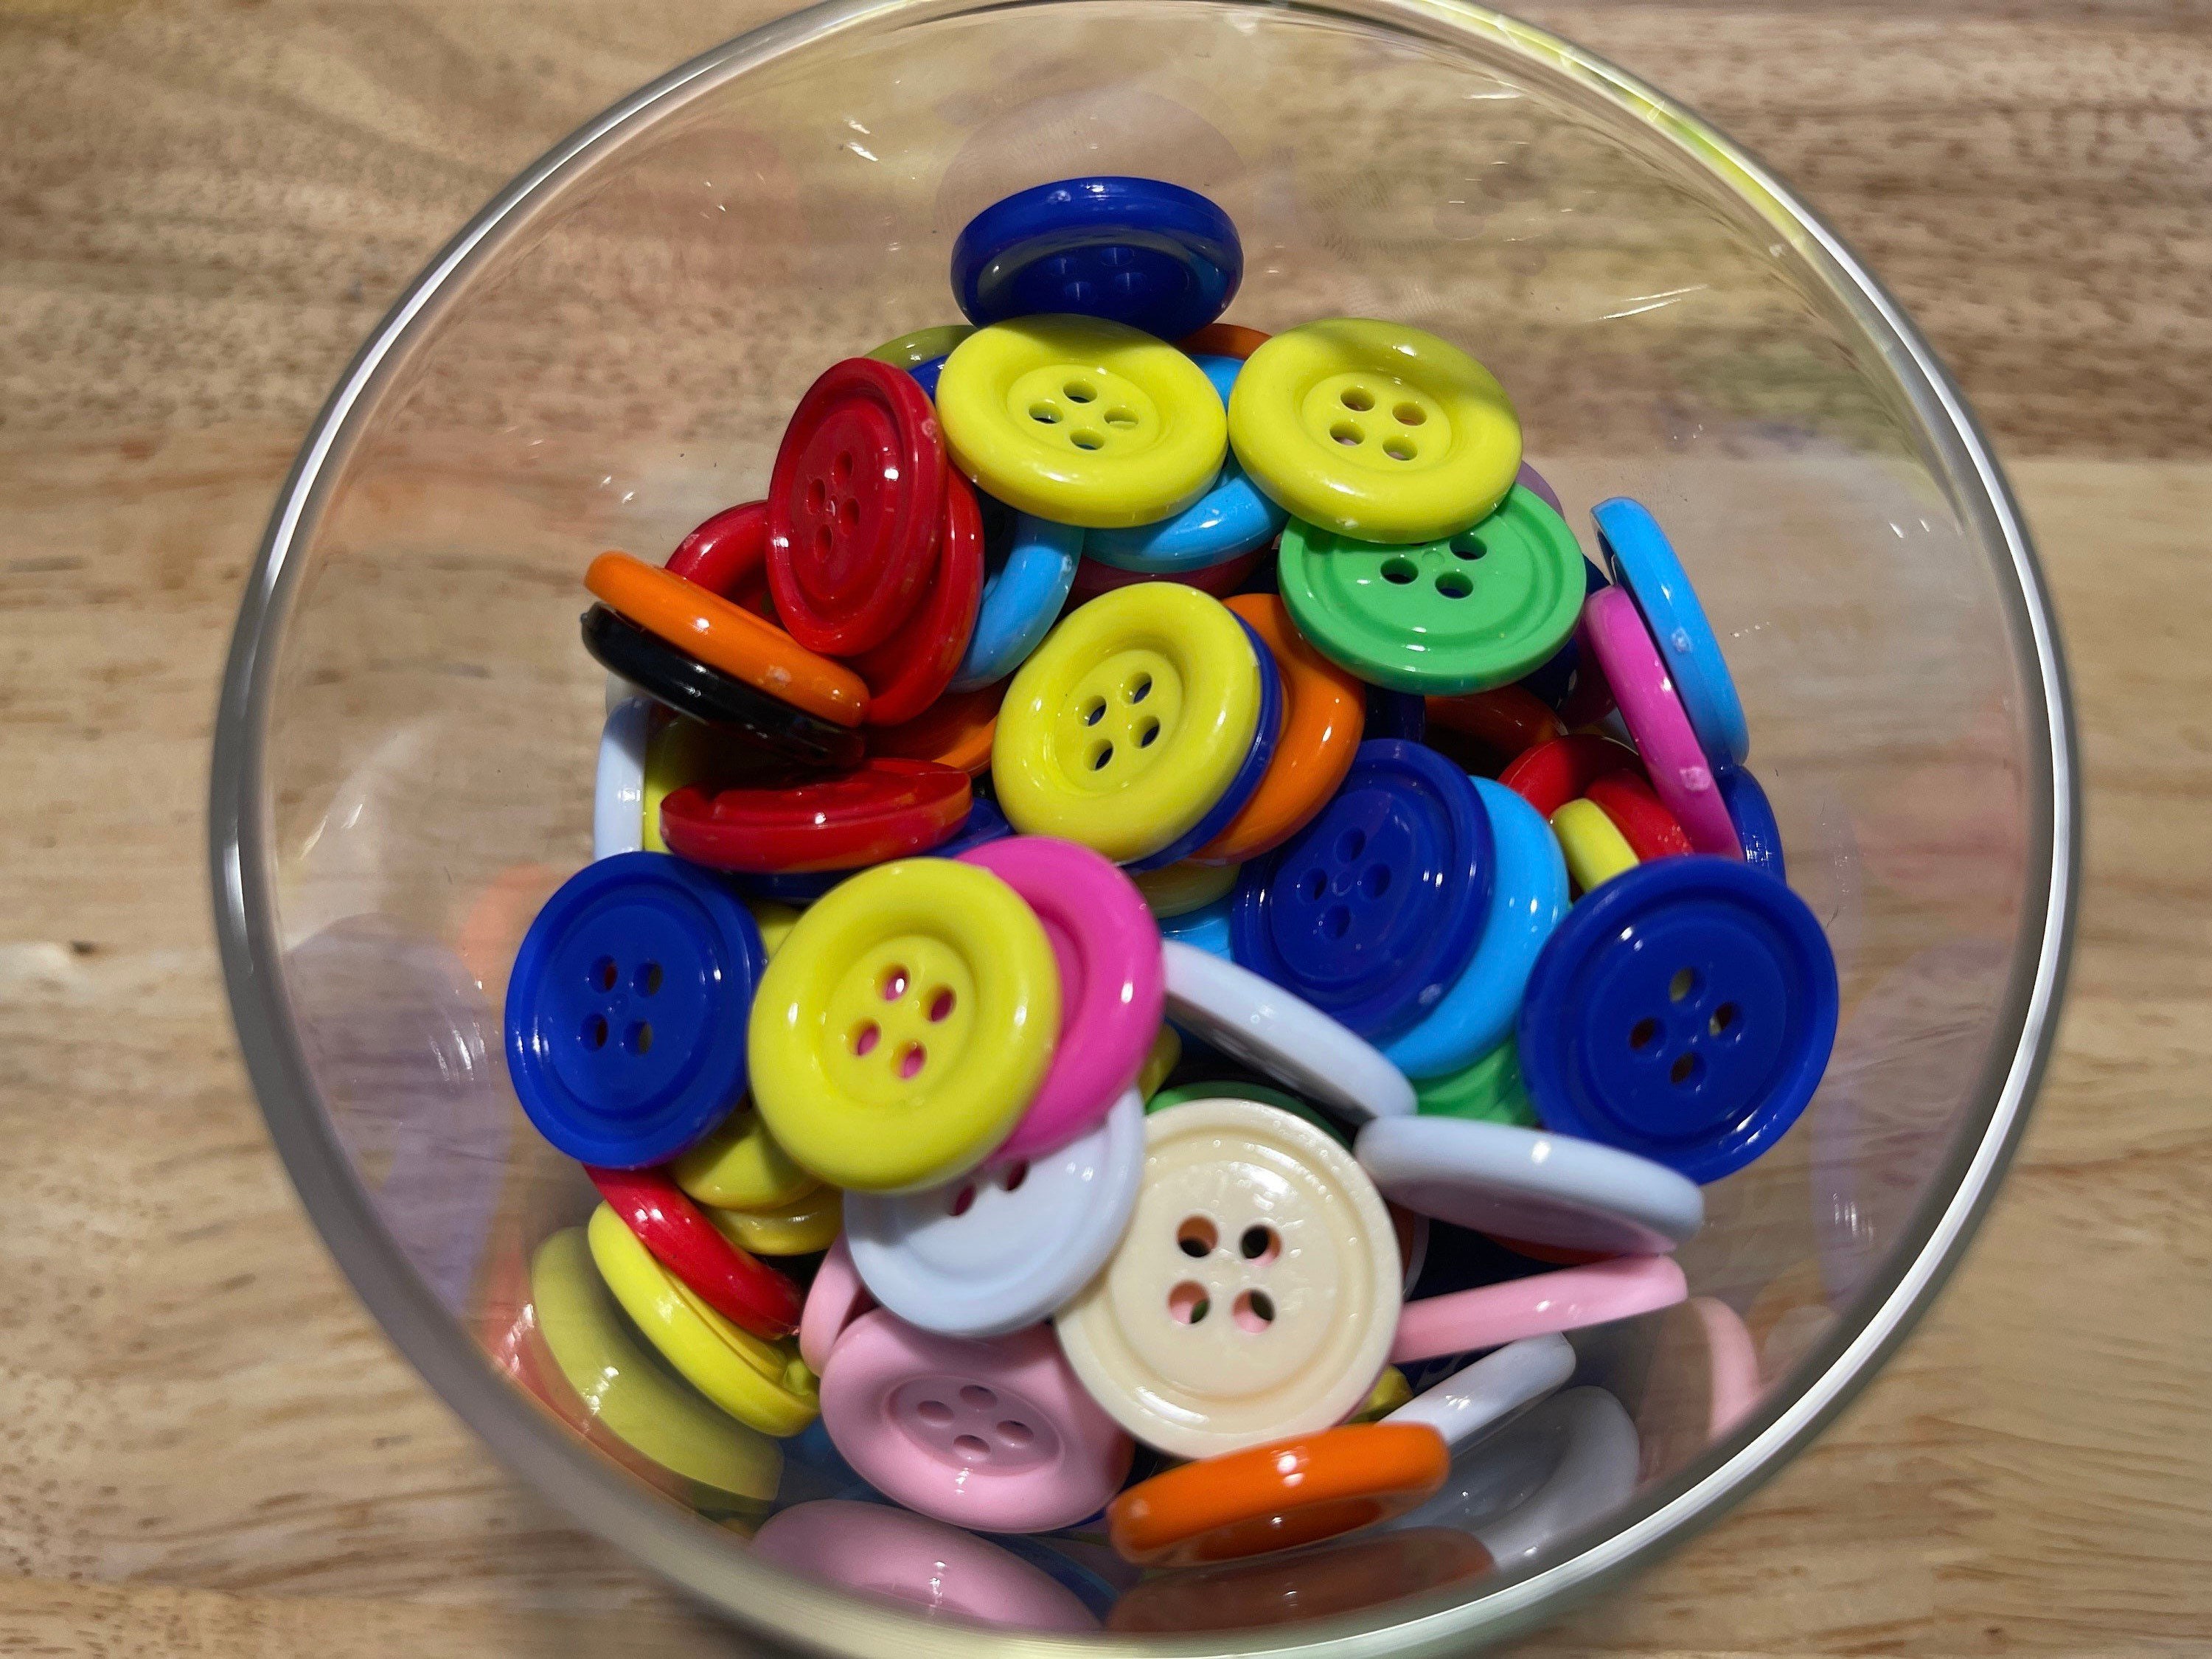 Colorful Buttons -  Canada